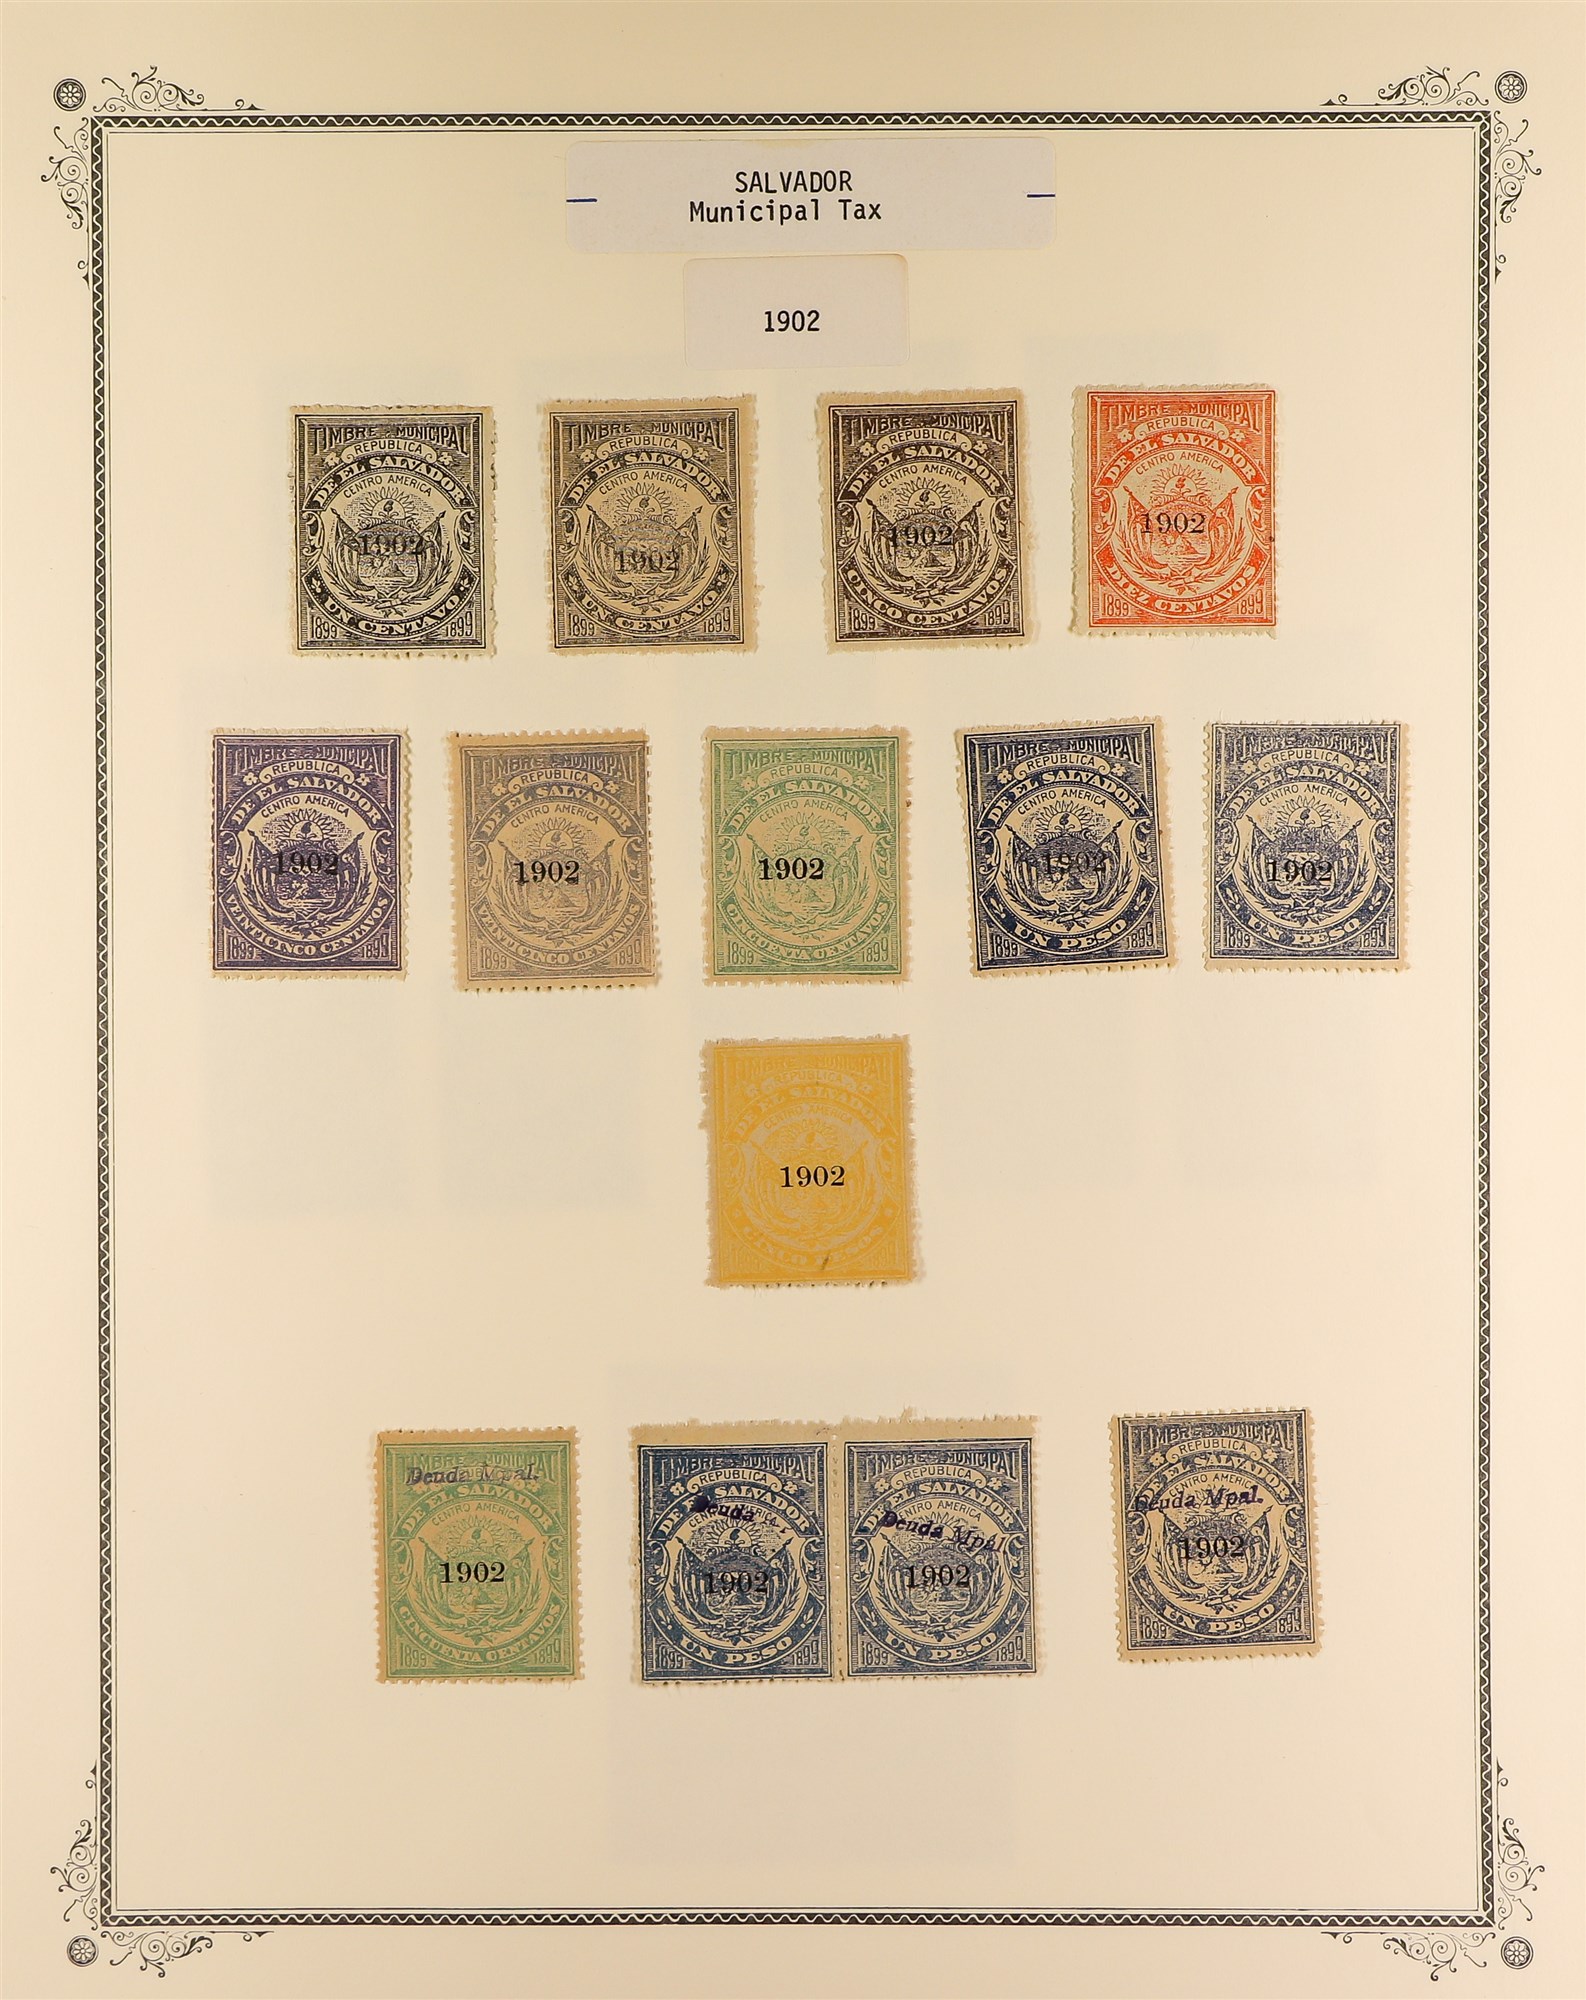 EL SALVADOR REVENUE STAMPS 1883 - 1925 mint & used collection of over 400 revenue stamps, on album - Image 18 of 27